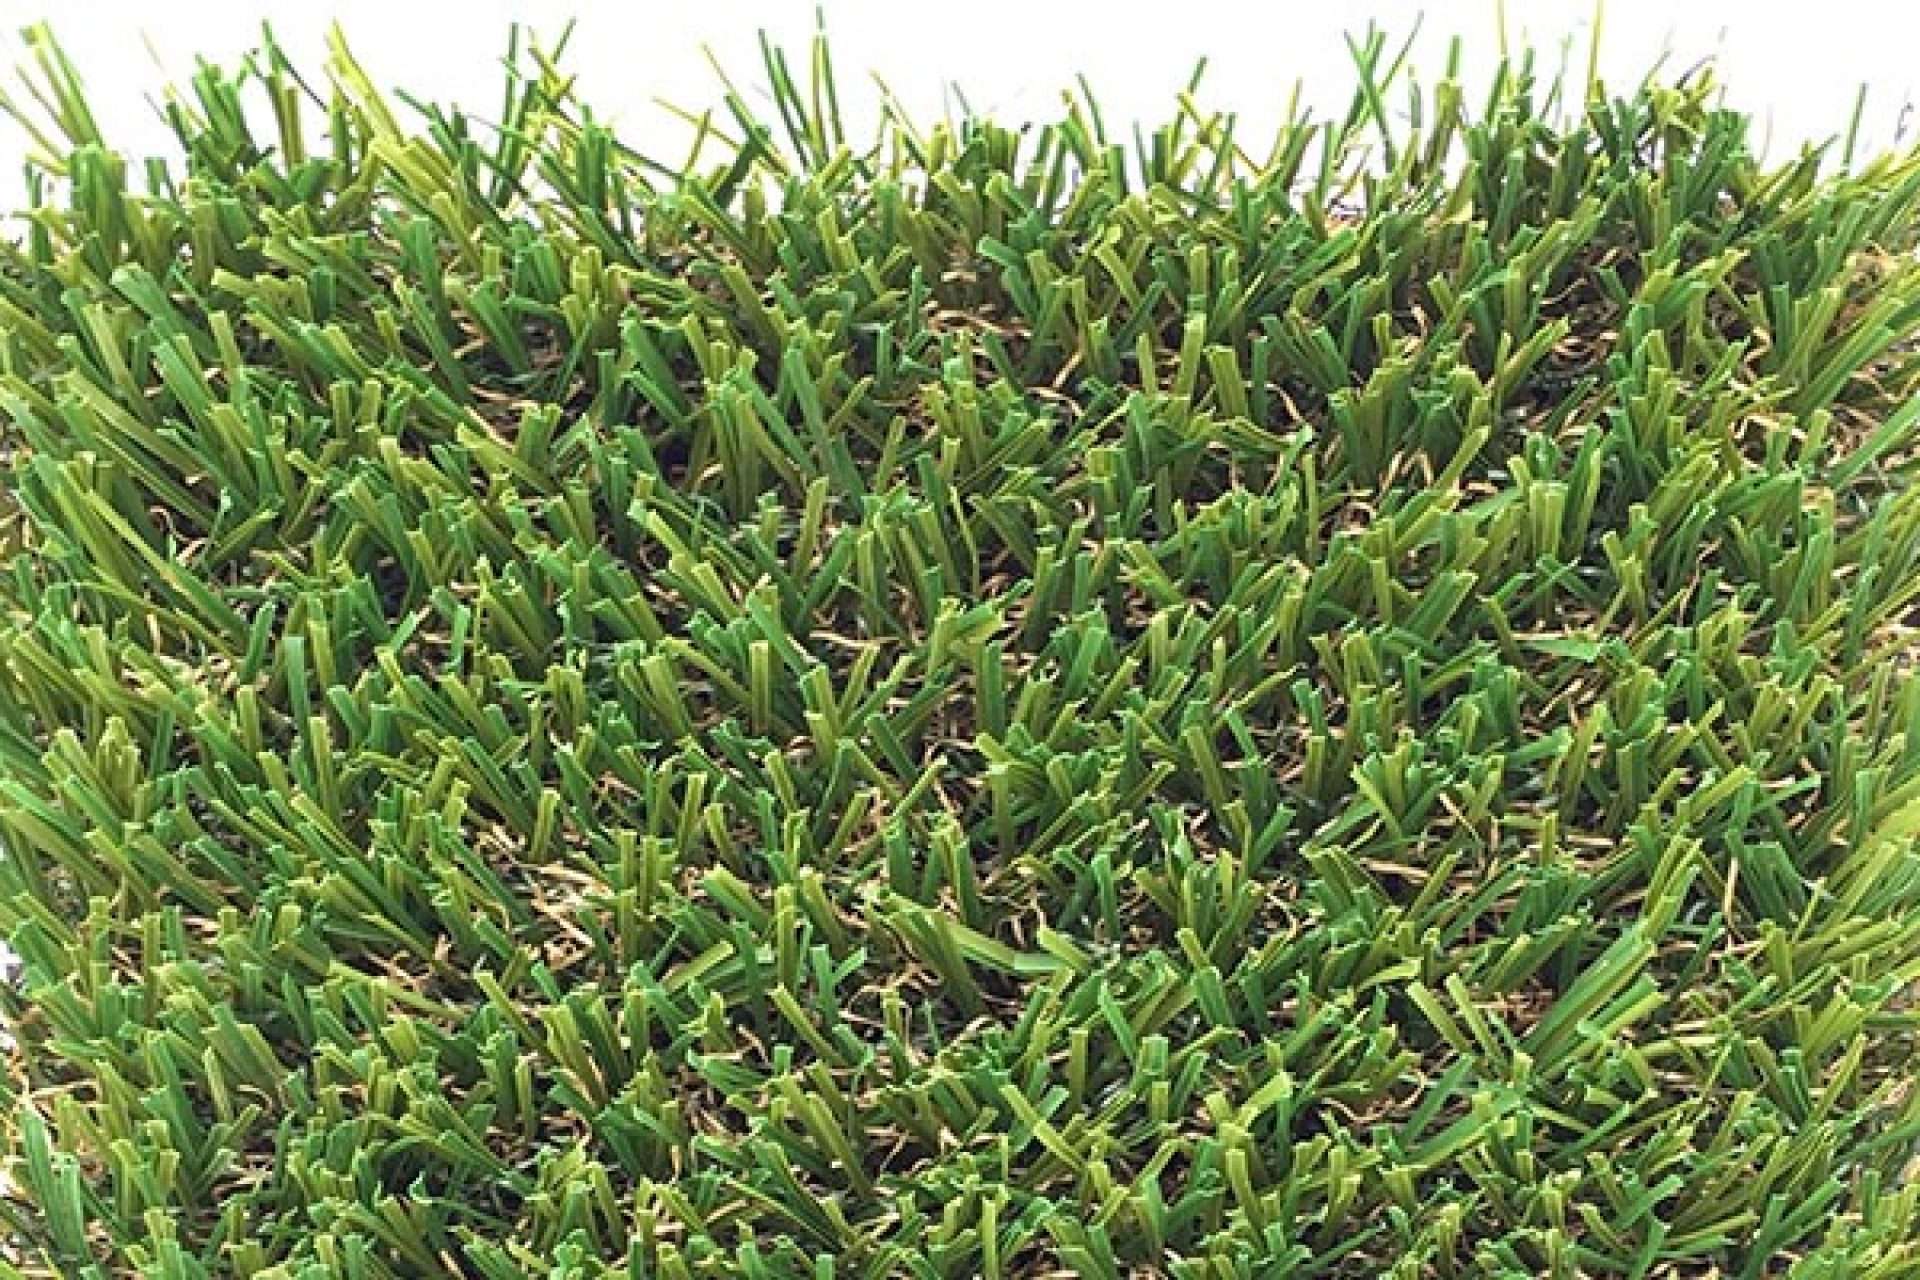 Looking for that artificial turf with a natural texture that is ideal for the nature lover and garden enthusiast. The Sierra Pacific – Lite blends...